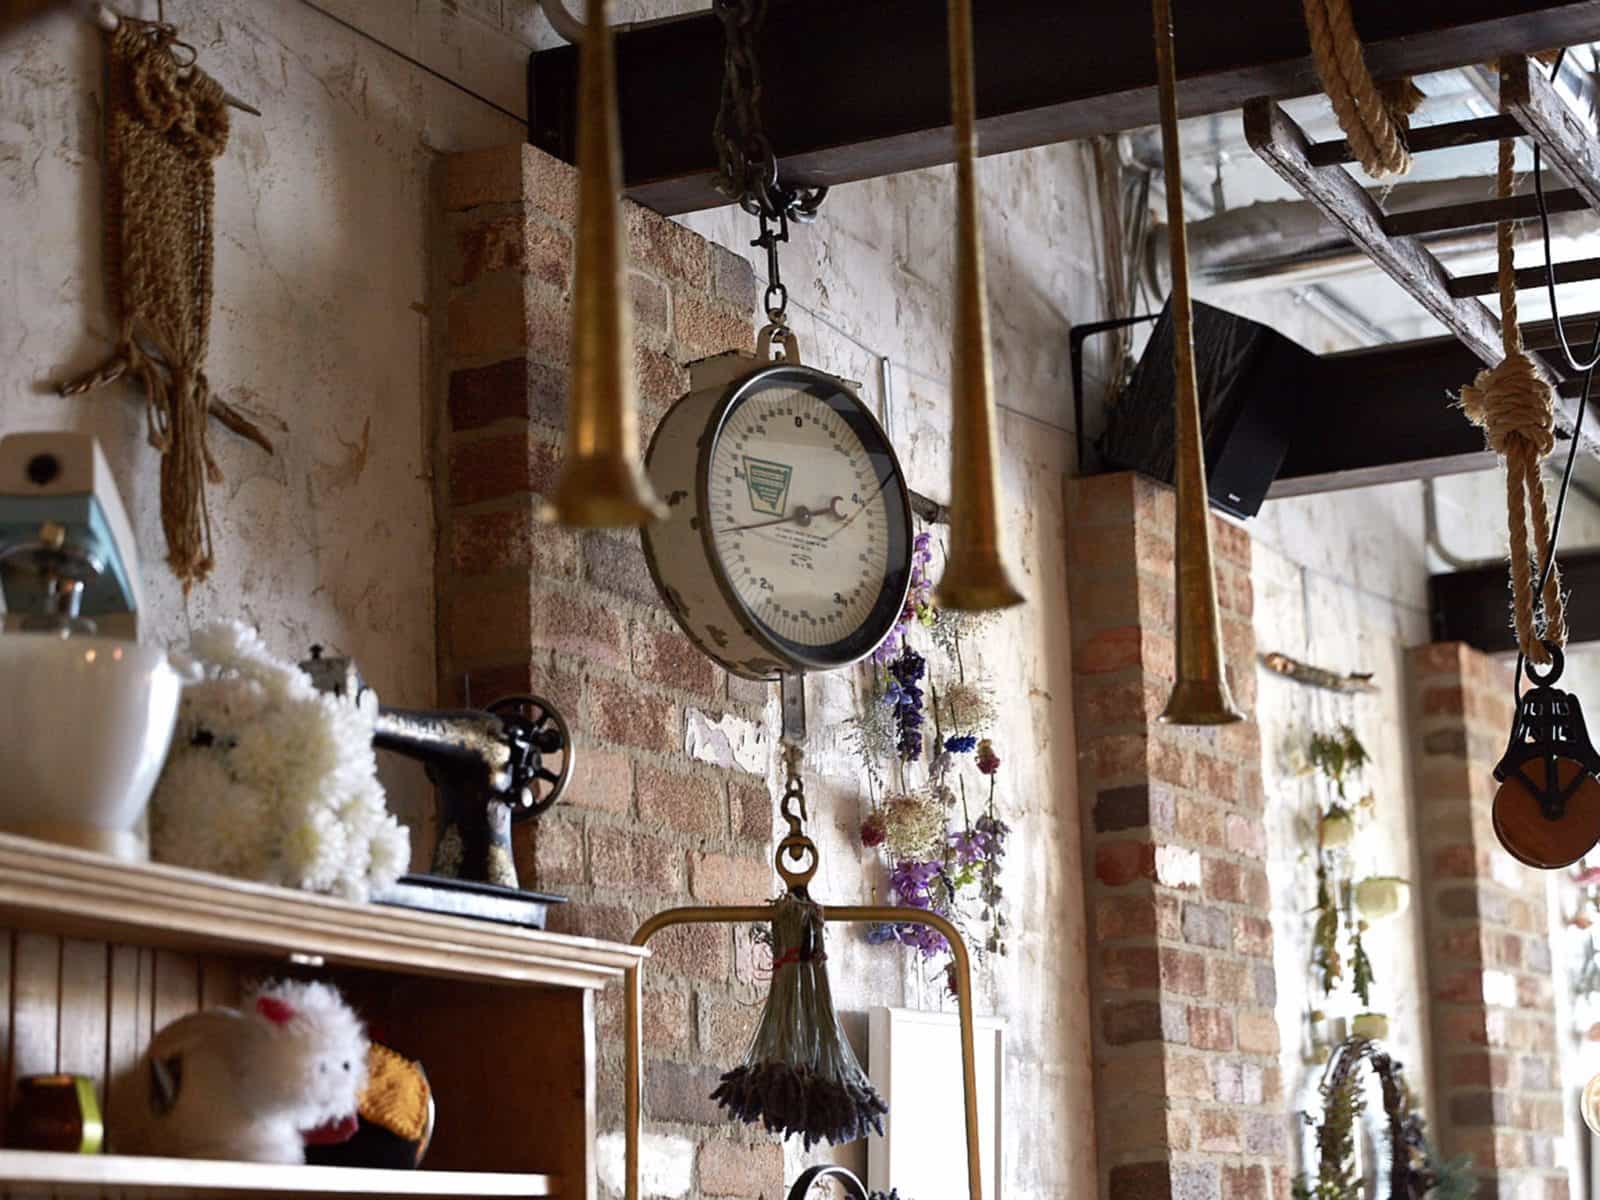 Quirky hanging objects from wooden beams and exposed brick walls